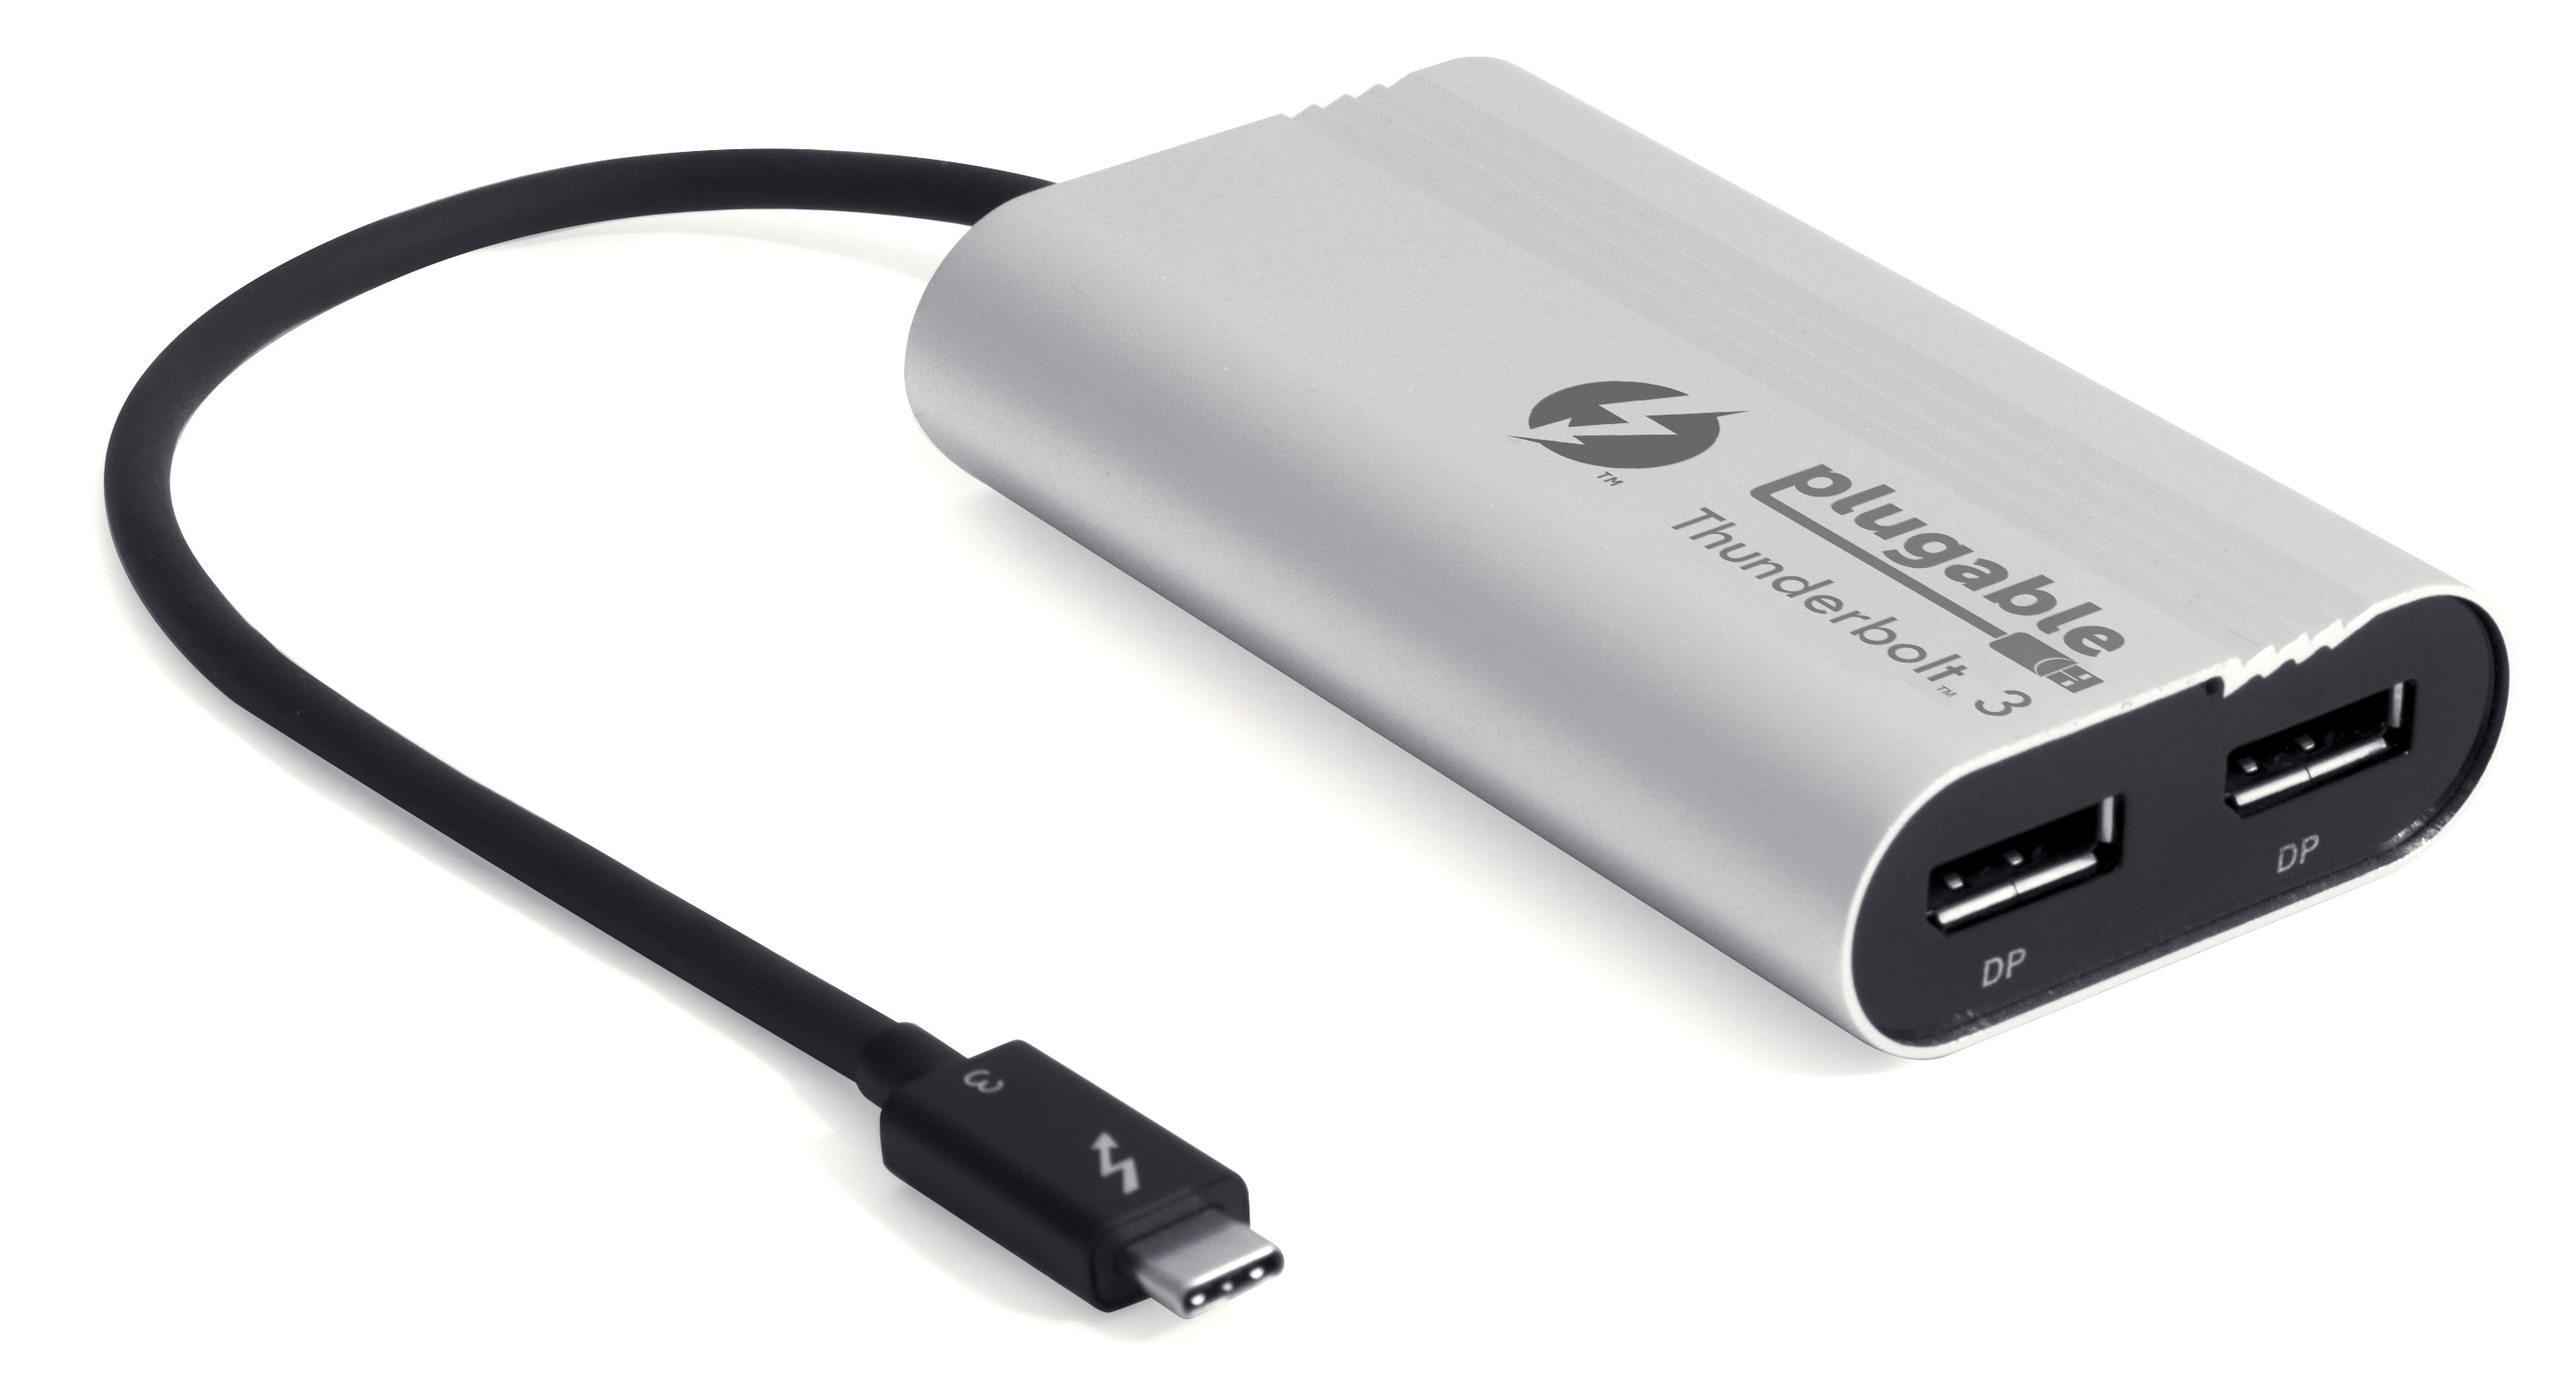 Plugable Thunderbolt 3 to Dual DisplayPort Output Display Adapter for Thunderbolt 3 Windows Systems (Windows Only, Not Mac Compatible, Supports Two 4K 60Hz Monitors Or One 5K). - image 1 of 6